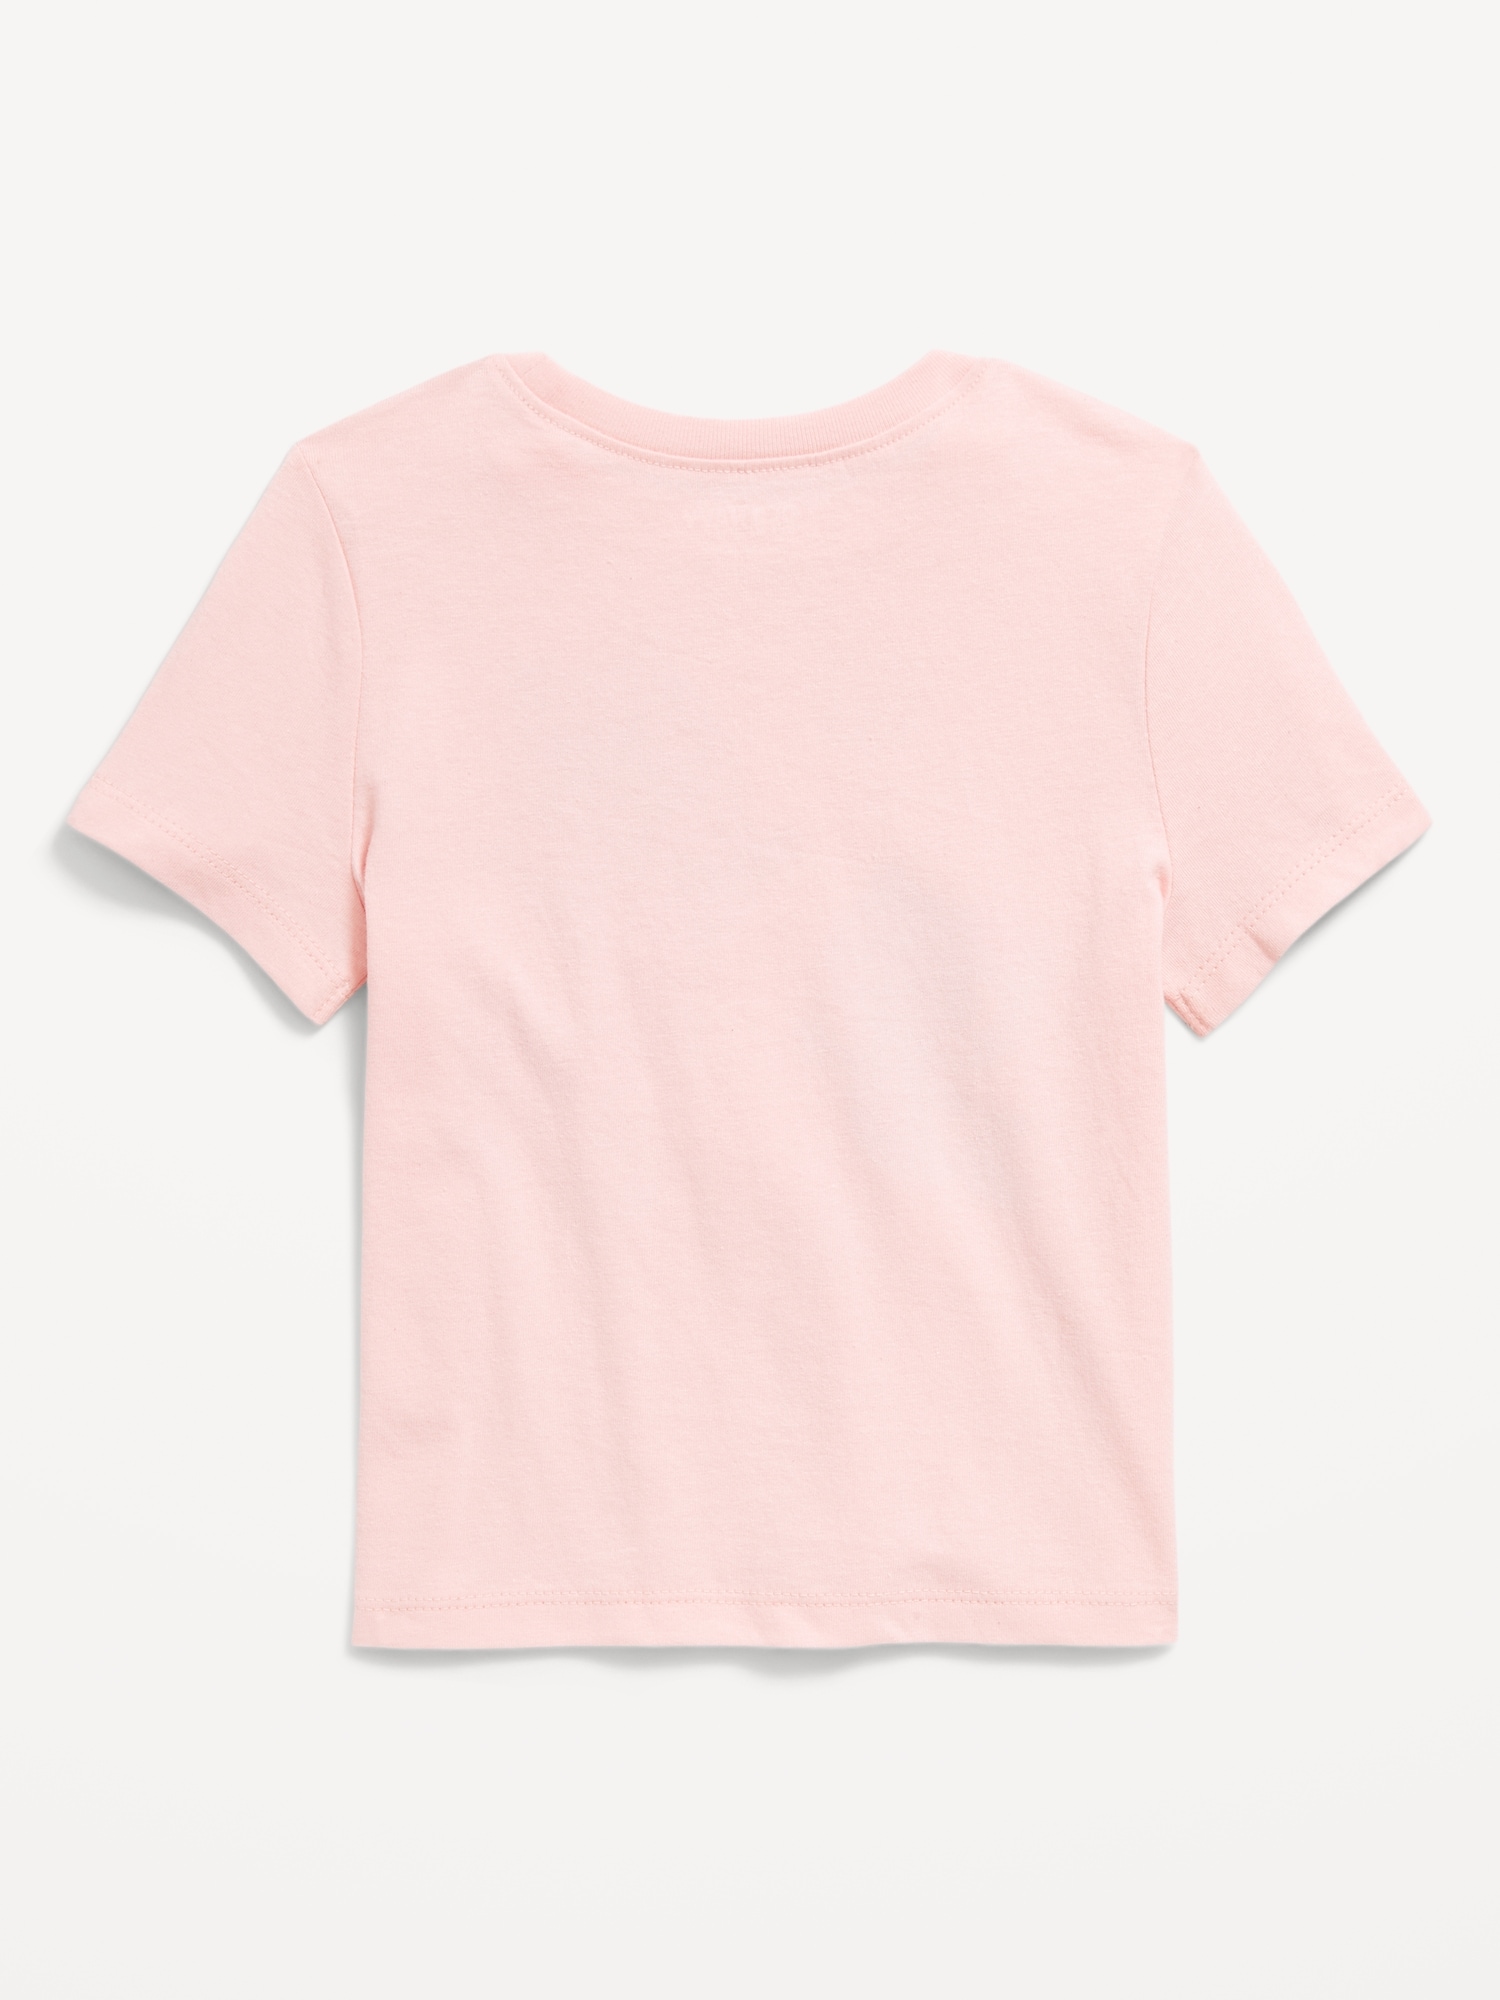 Gabby's Dollhouse™ Graphic T-Shirt for Toddler Girls